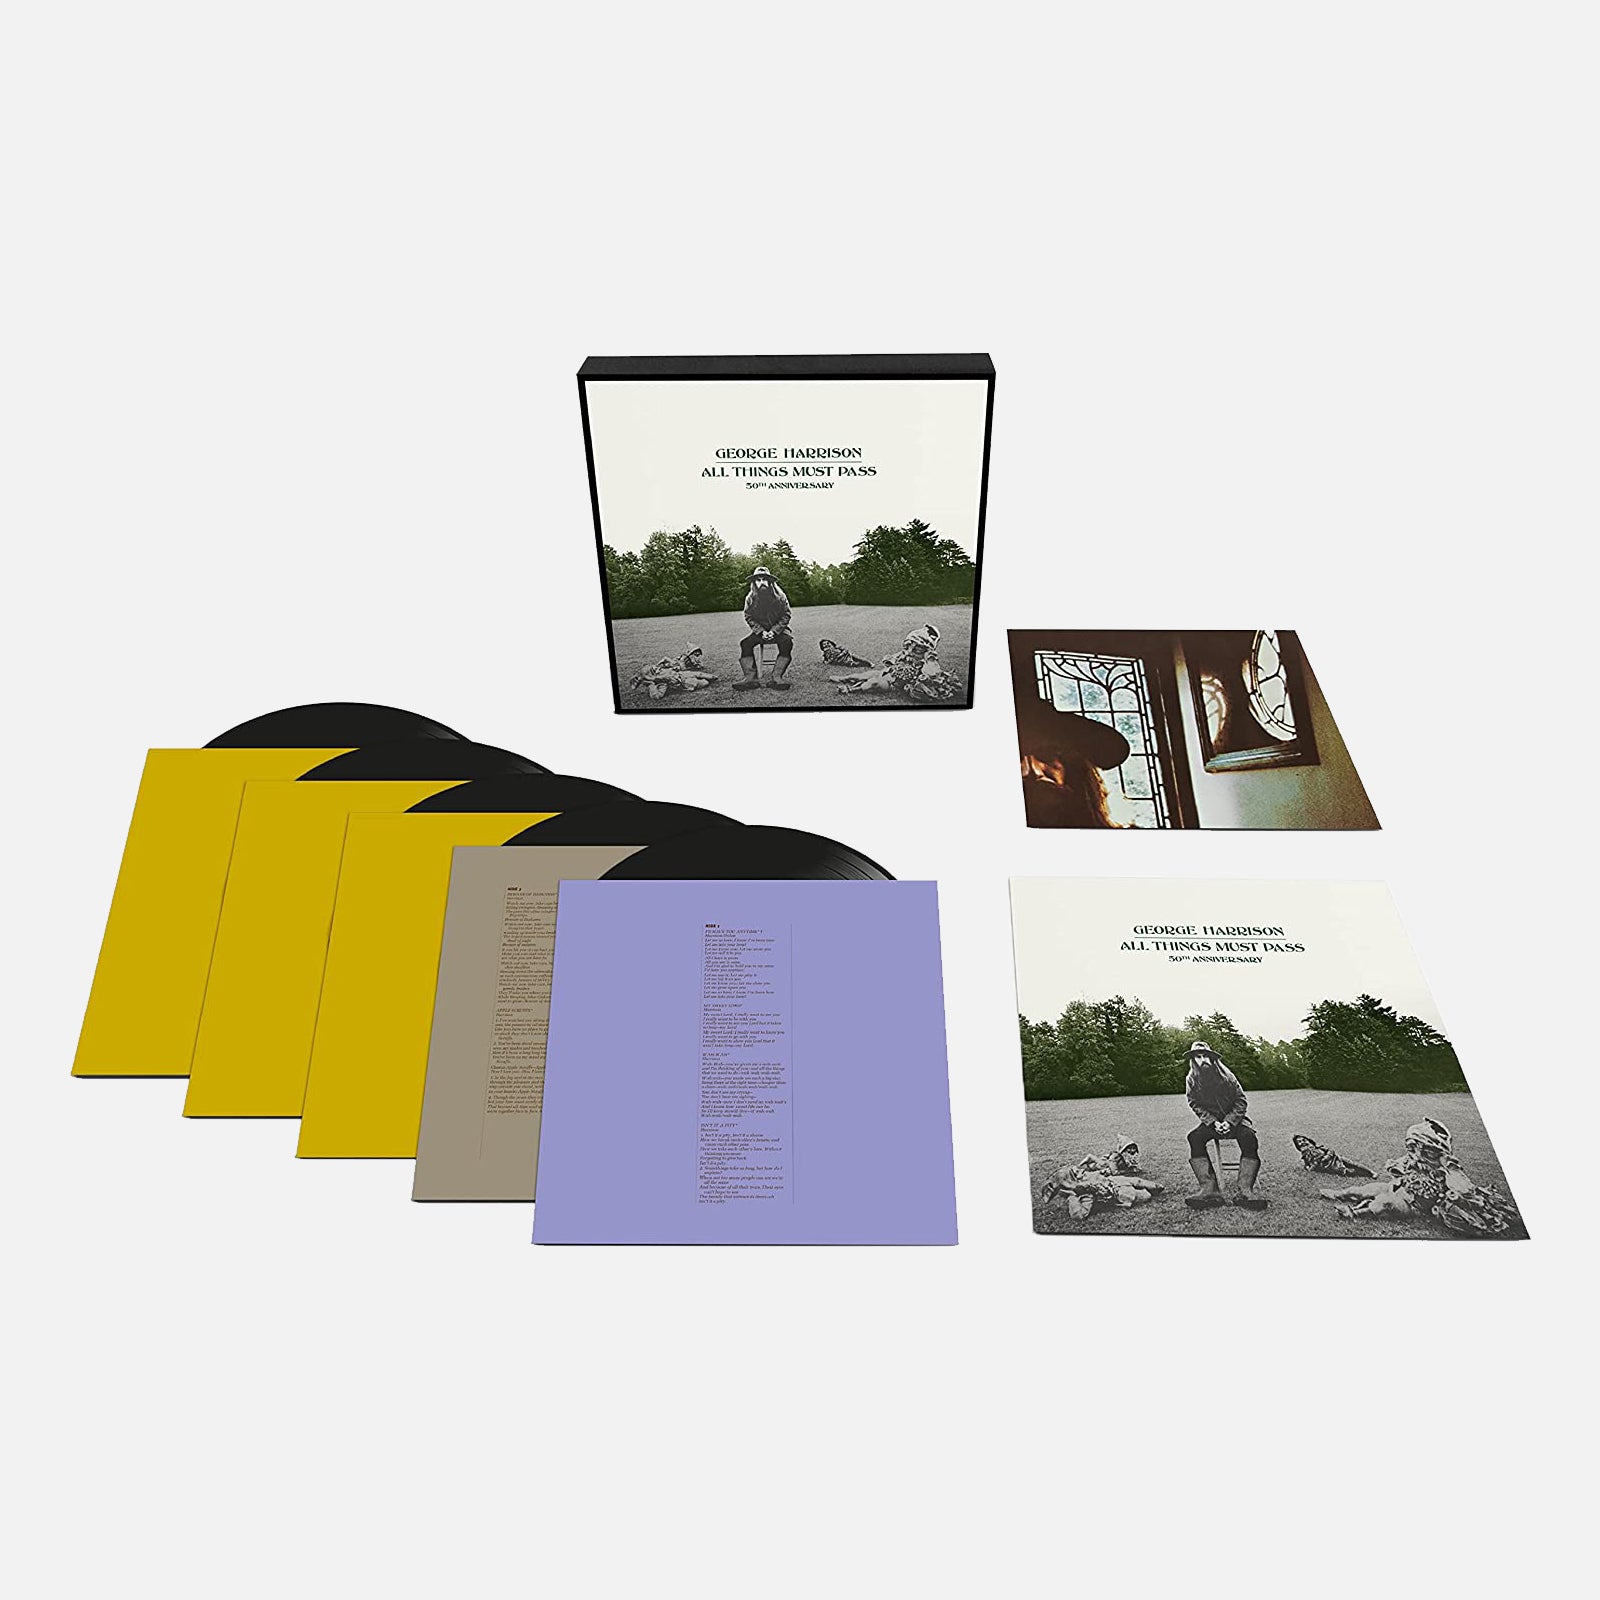 All Things Must Pass [5 LP Box Set]